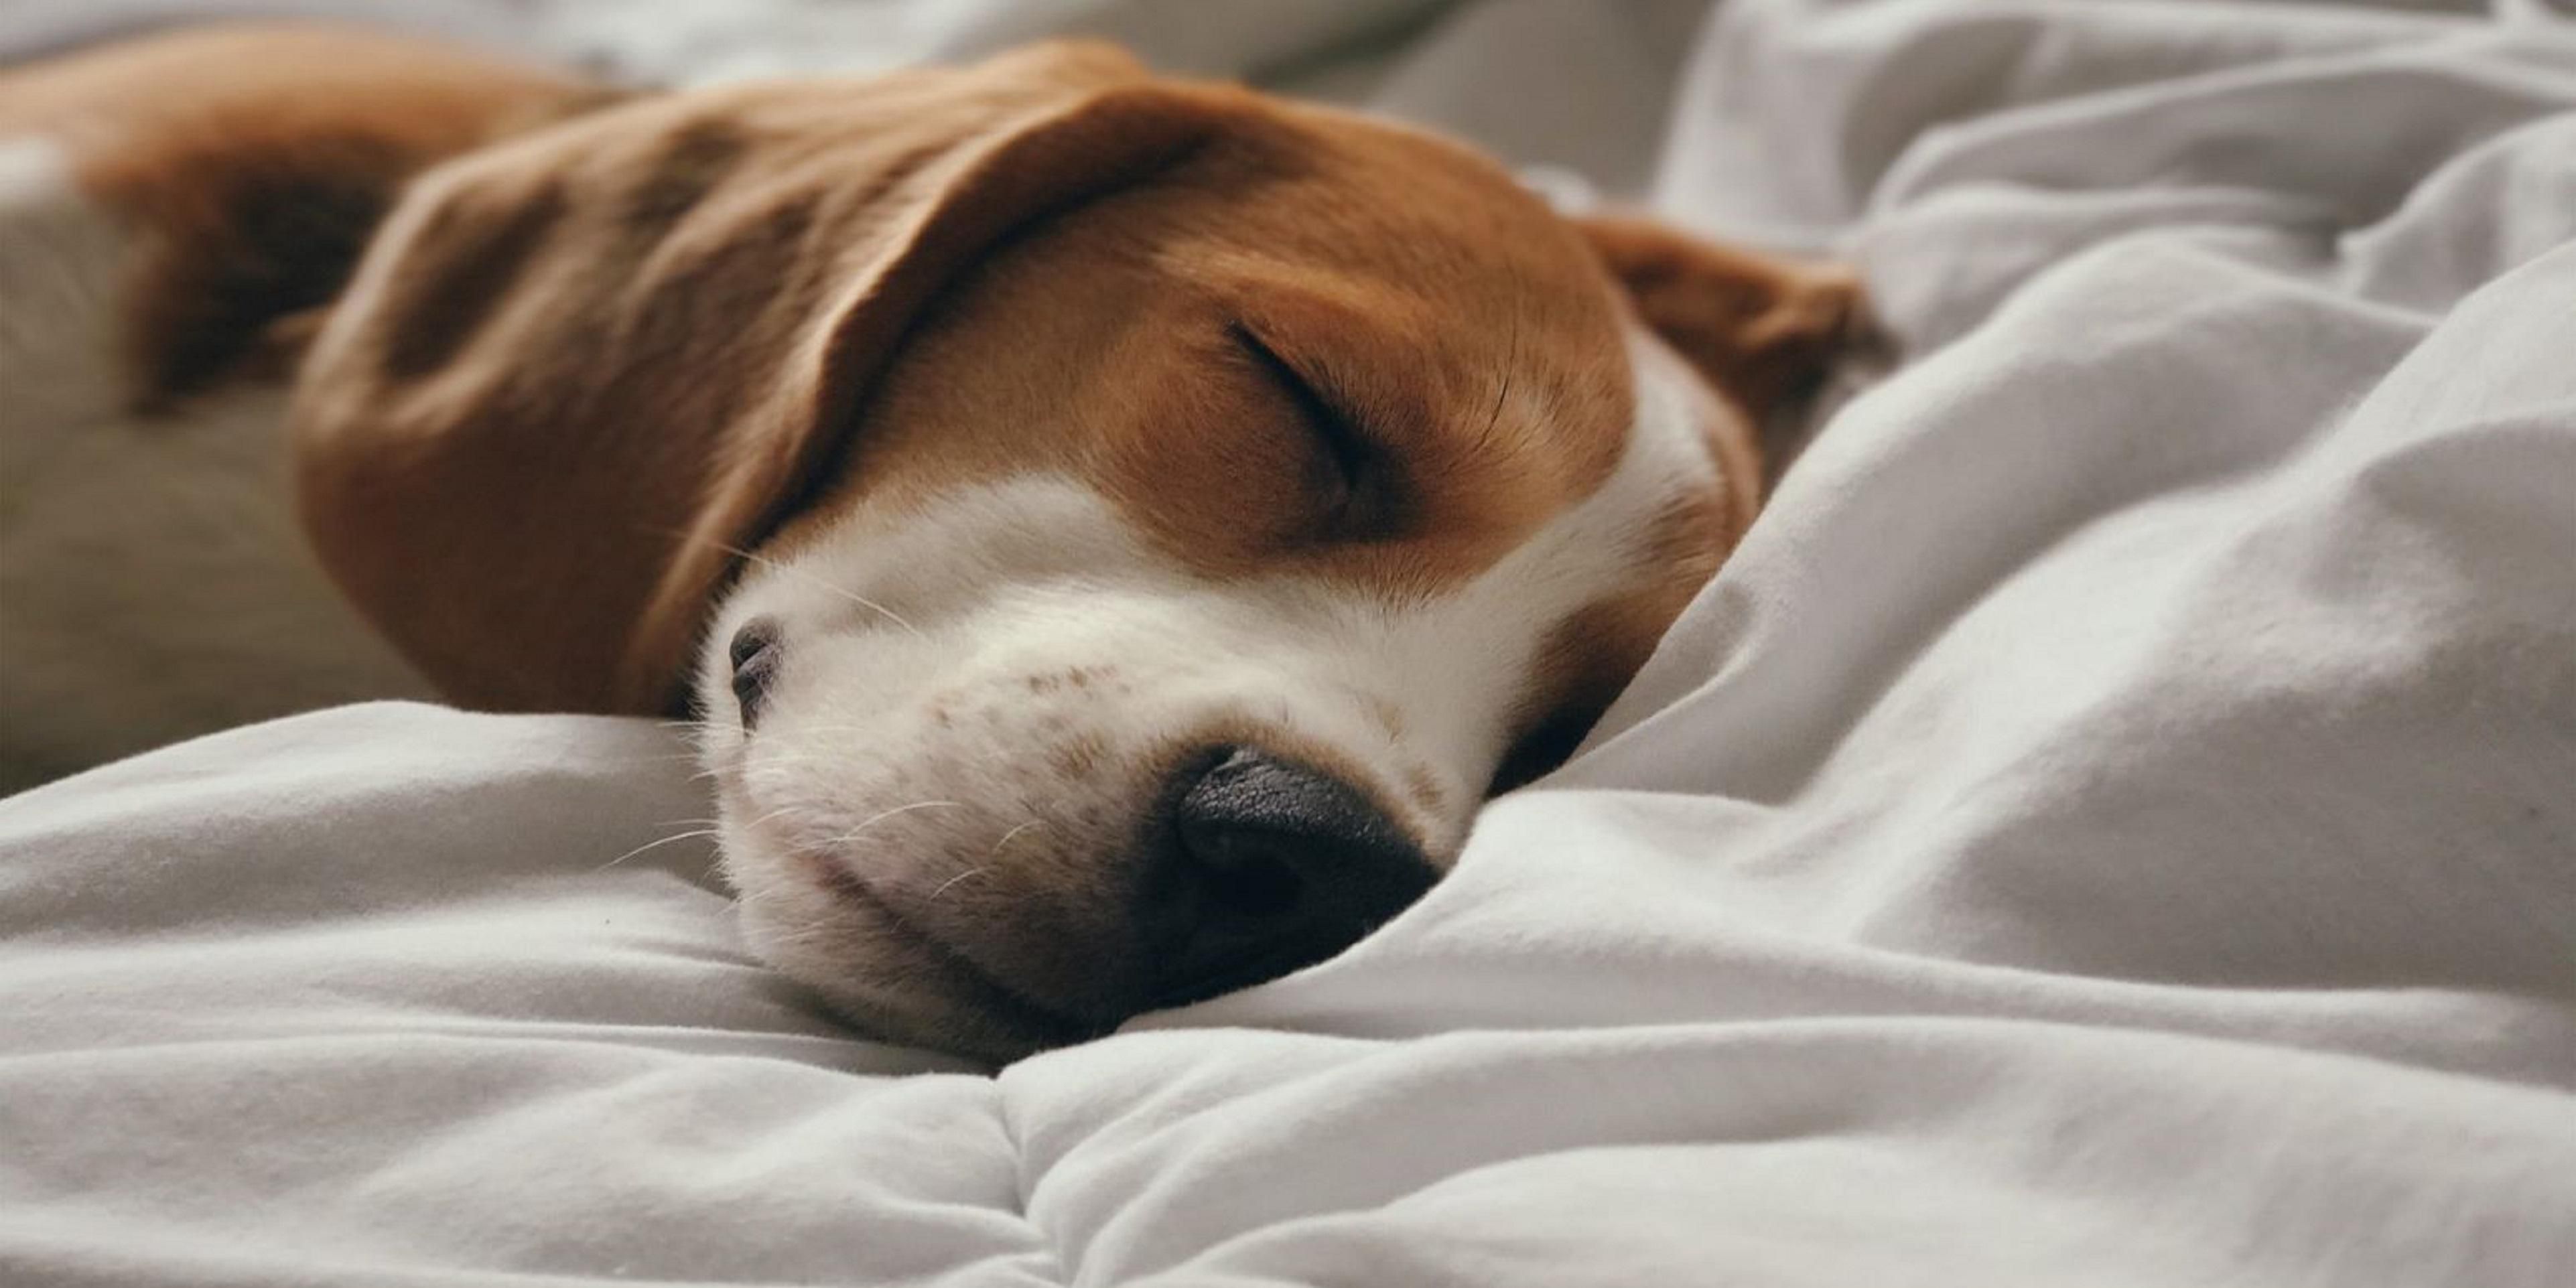 Pets are welcome at Holiday Inn Express & Suites South Portland.

Our Pet Policy: Pet friendly hotel! One time non refundable fee of 75.00 USD plus tax charged at check out. We are surrounded by wooded area with sidewalks perfect for walking your dog. All pets are accepted.